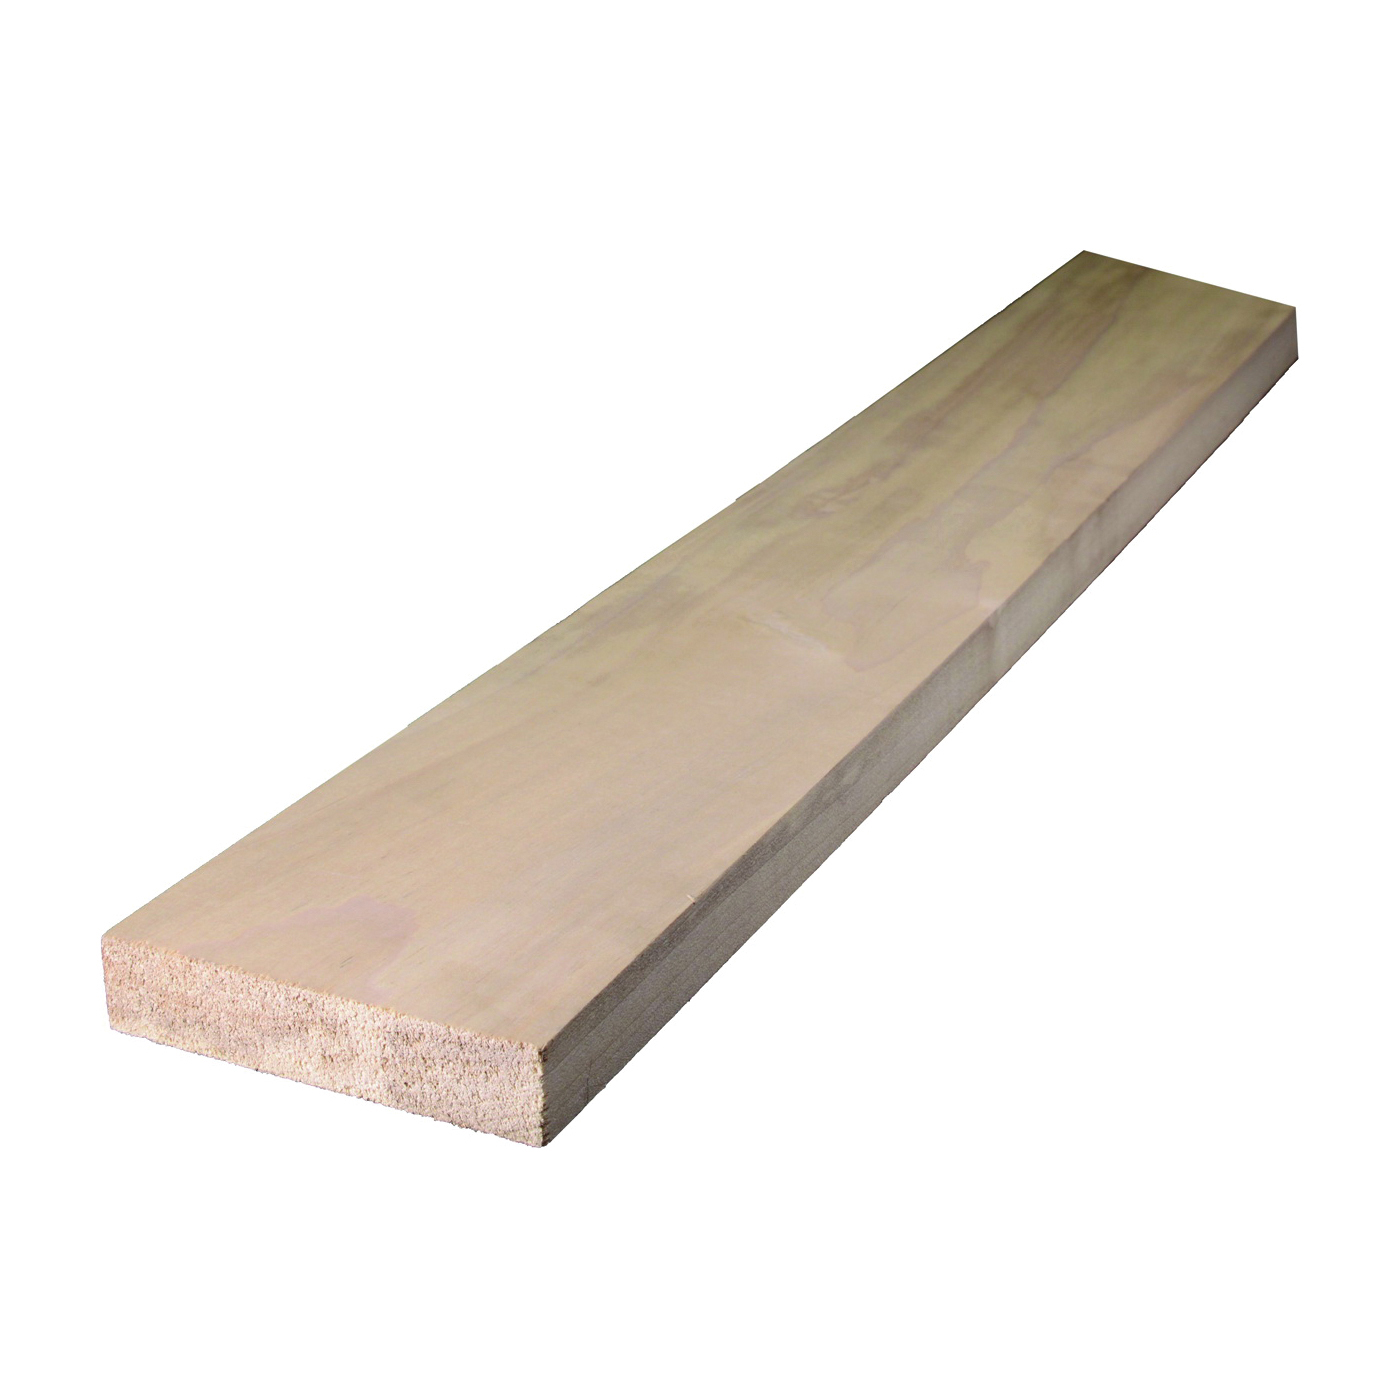 ALEXANDRIA Moulding 0Q1X4-27048C Hardwood Board, 4 ft L Nominal, 4 in W Nominal, 1 in Thick Nominal - 1